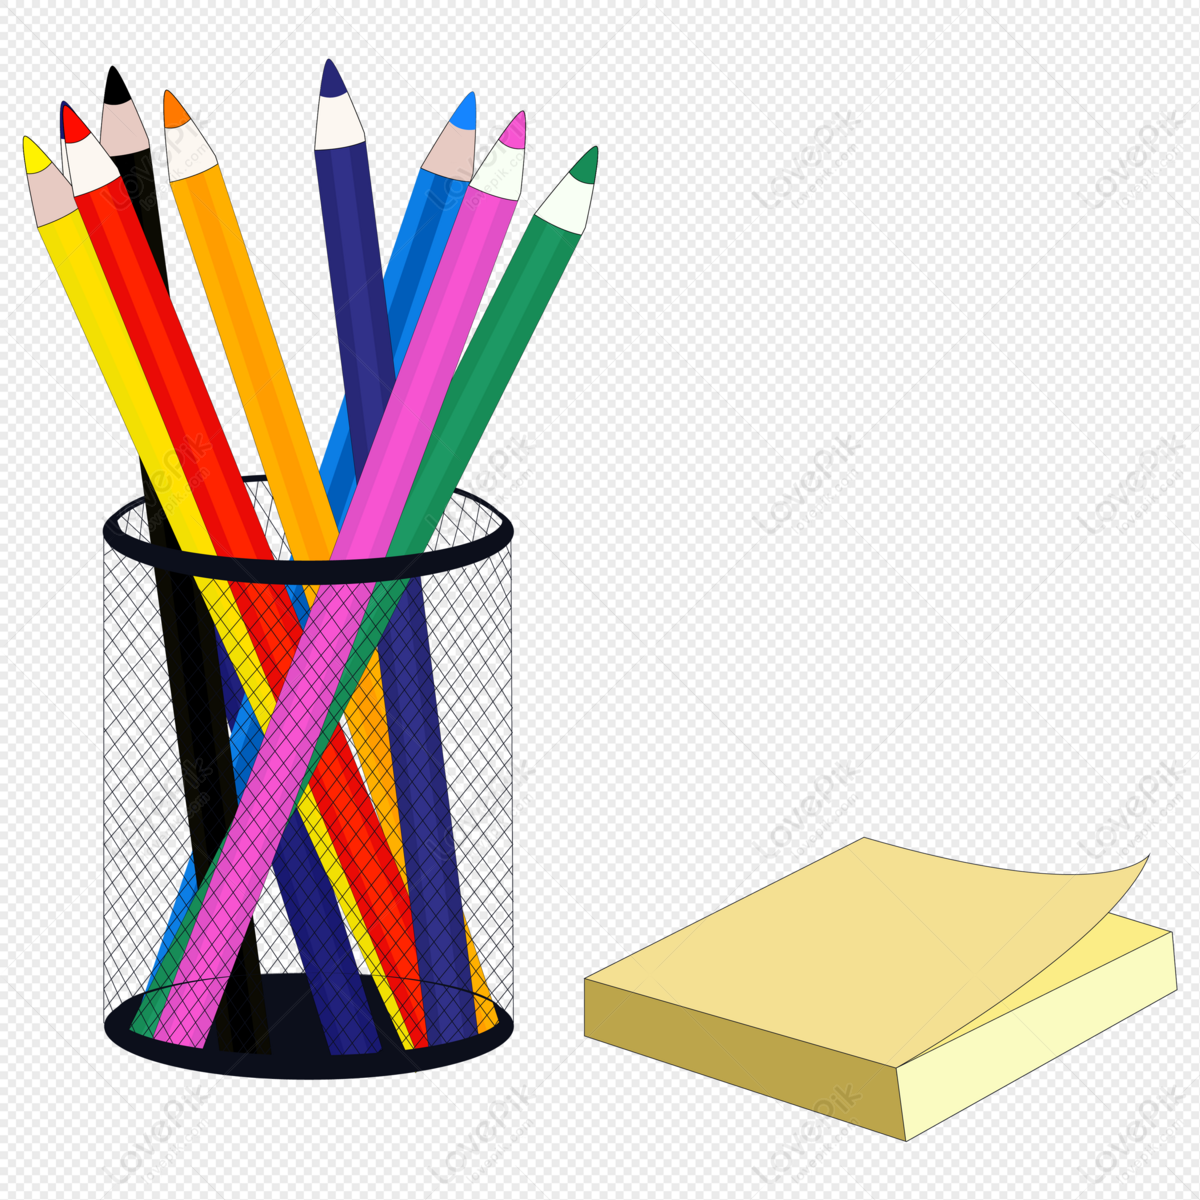 Pen Stand Set Vector Brush Pencil Stock Vector (Royalty Free) 1180592578 |  Shutterstock | Fashion design drawings, Vector brush, Pencil tool